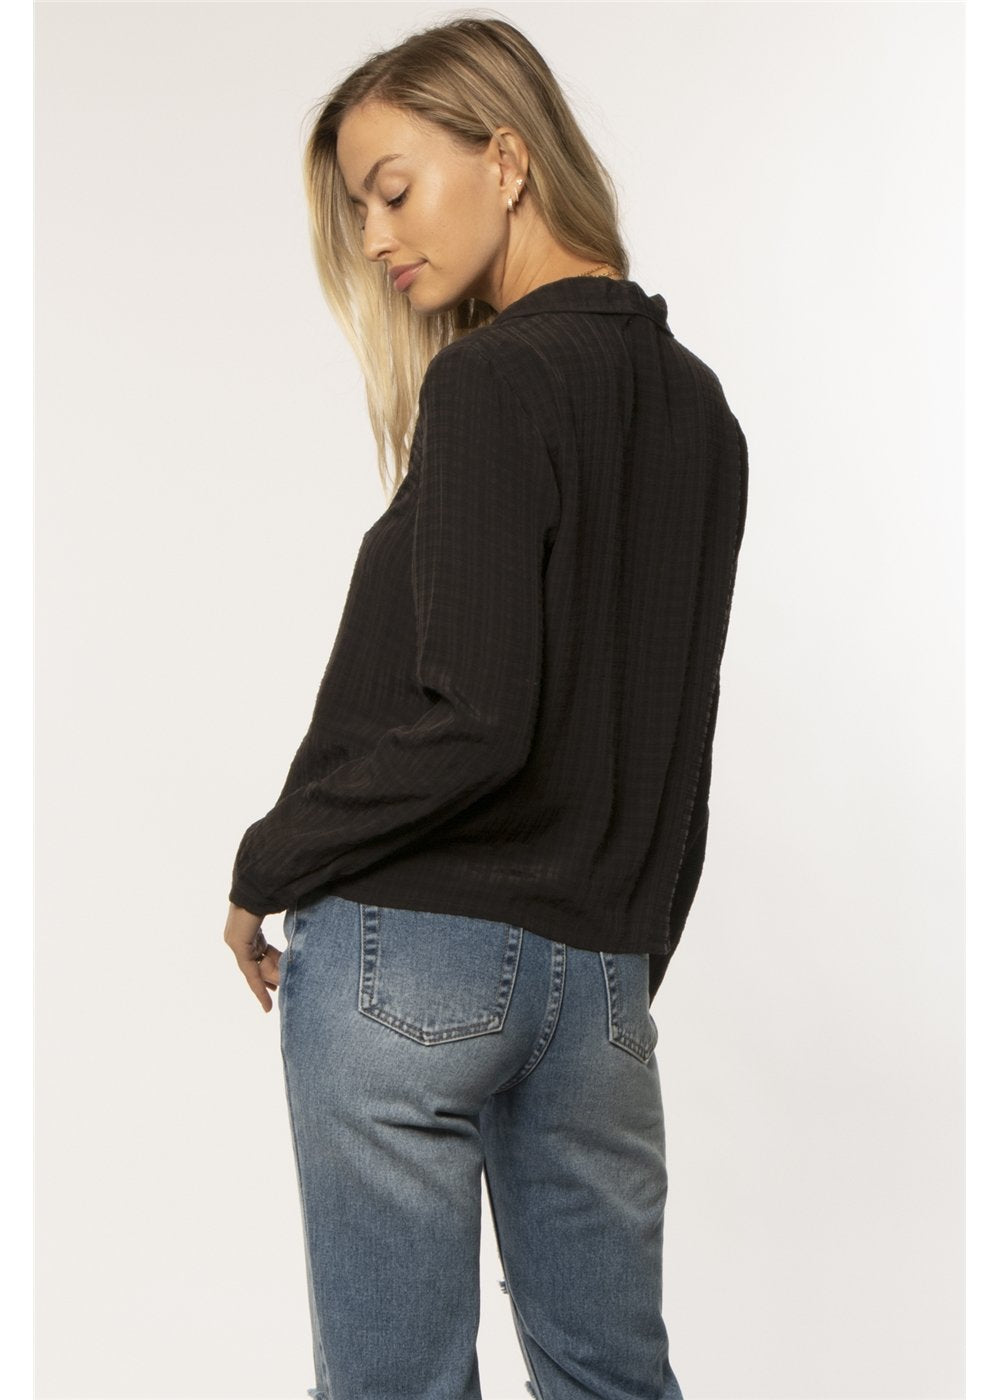 Amuse Society Women's Black Carson Long Sleeve Woven Top. Back View on Model. 